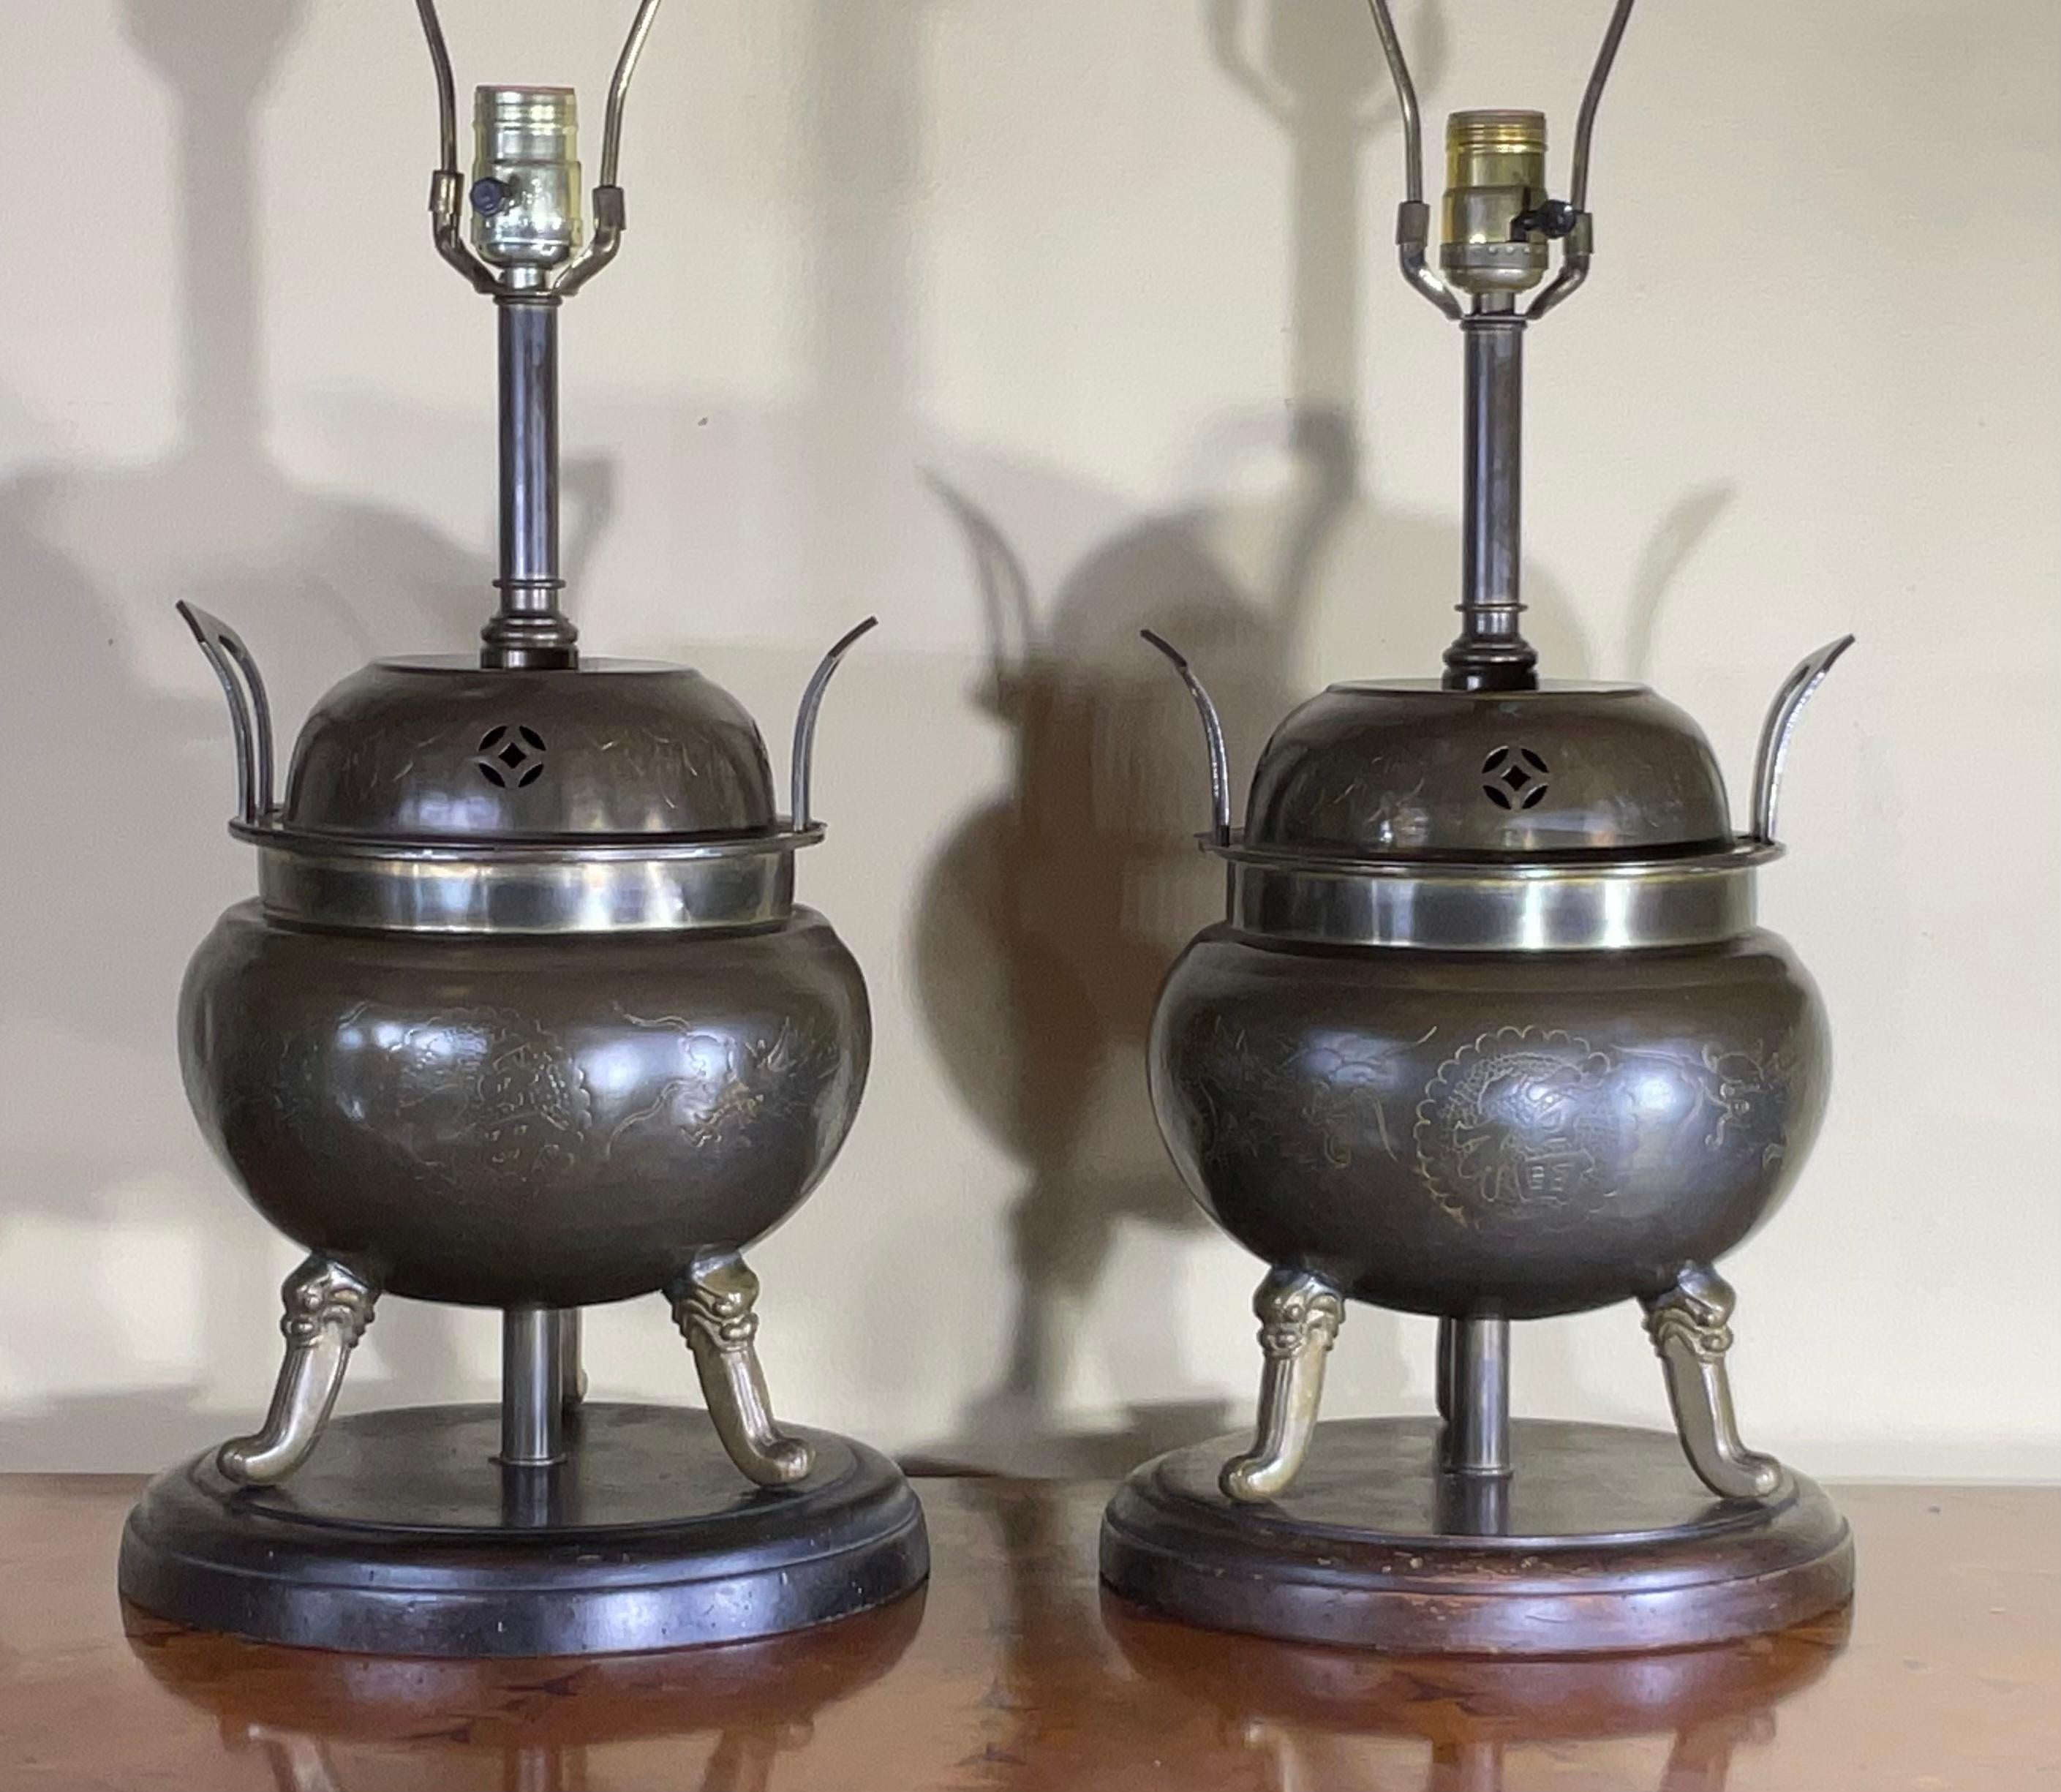 
Pair of elegant  Chinese Antique incense burner. It shows very detailed hand craft works of Chinese calligraphy and dragon etching on copper . With the original food dogs finials .
Shades are not included .
Size of the lamps without lampshade harp